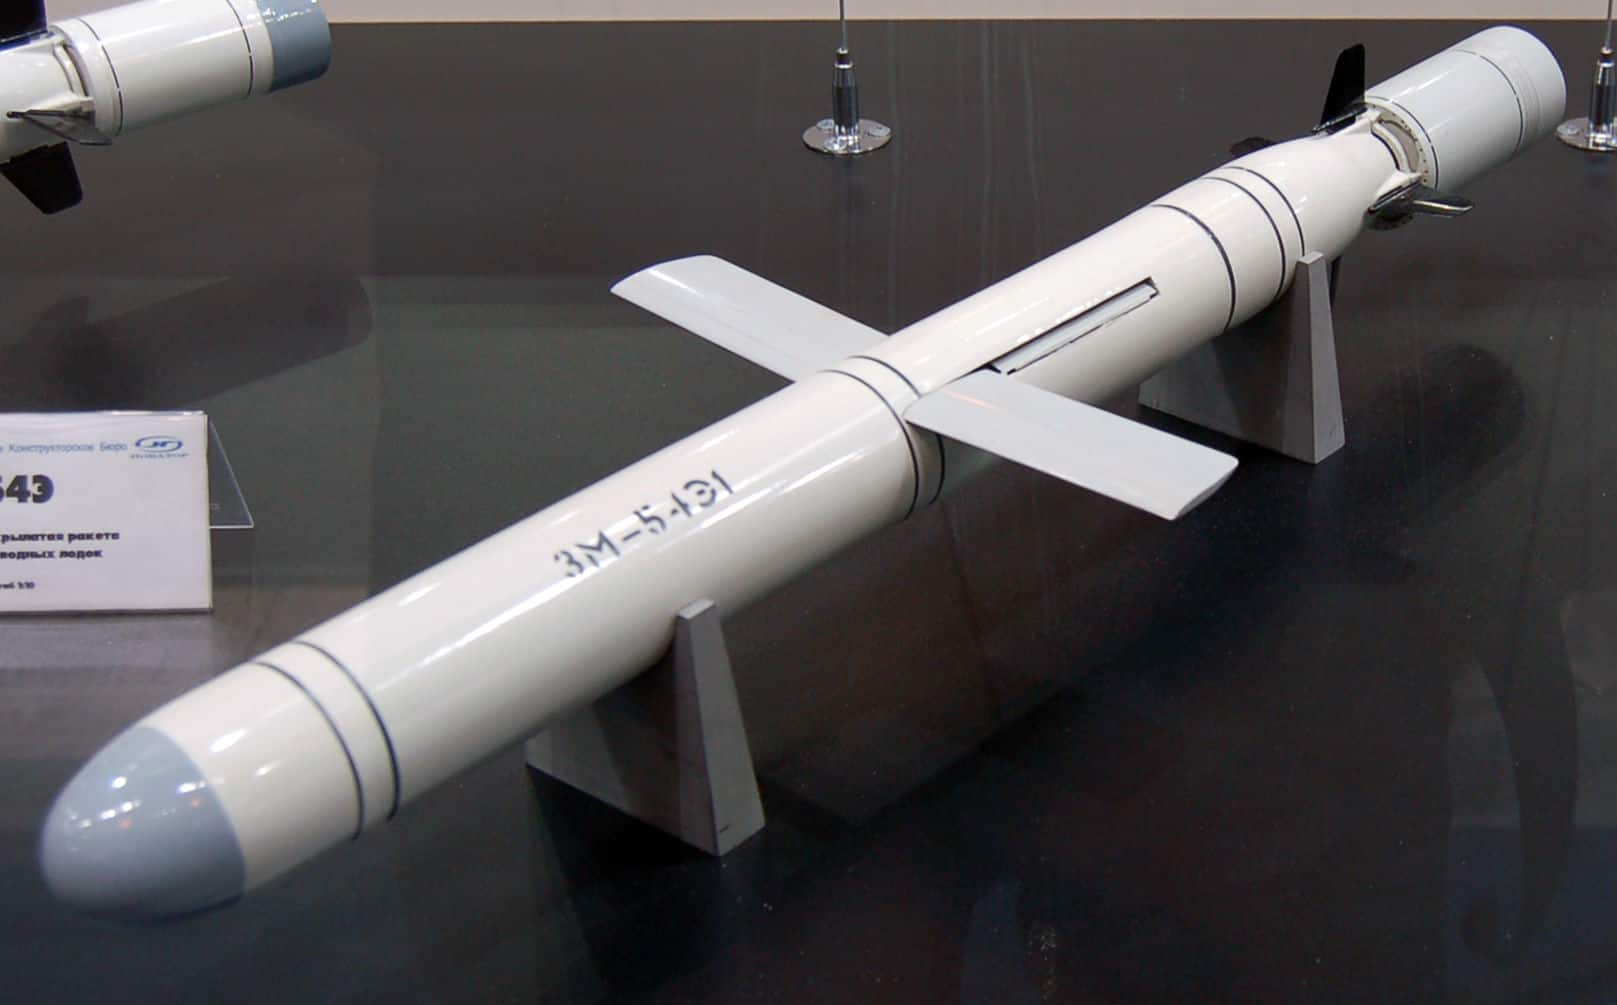 Russia may supply India warships armed with lethal Kalibr cruise missiles